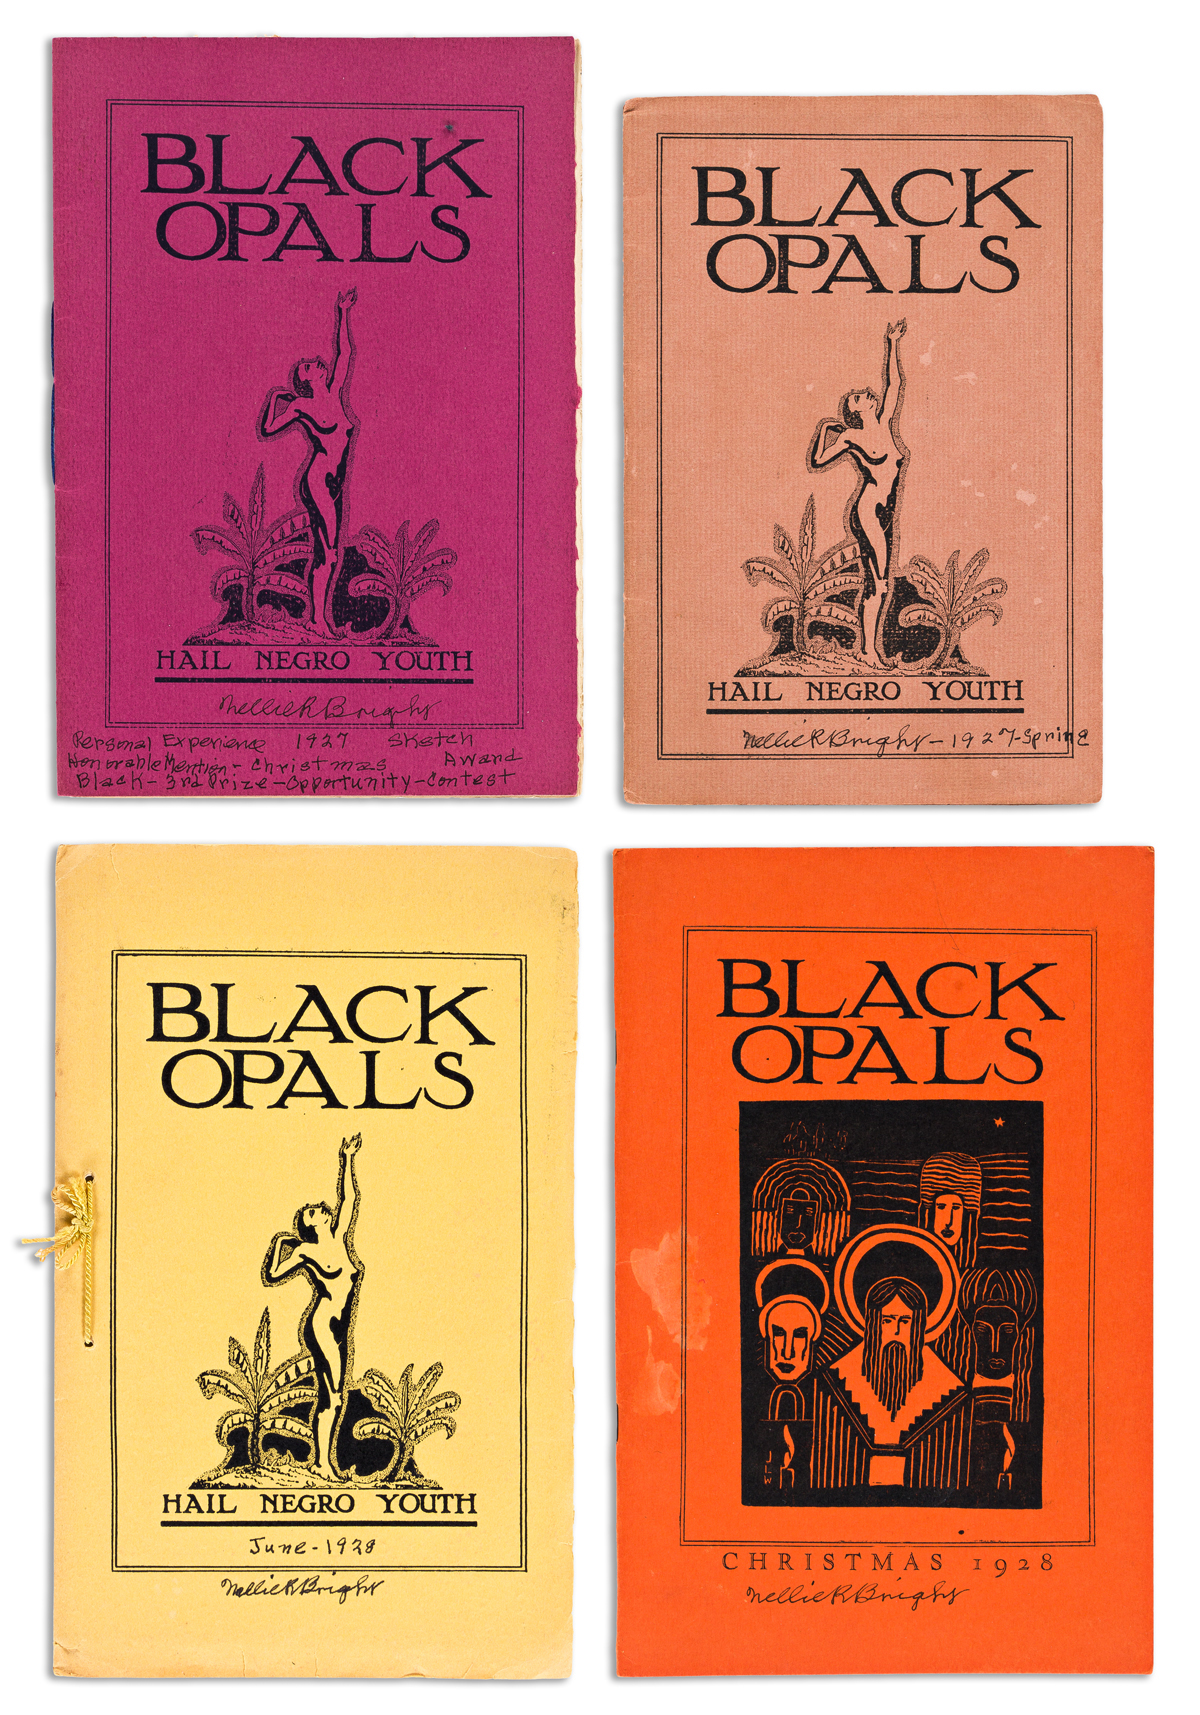 (LITERATURE.) 4 issues of Black Opals, the legendary limited-edition literary journal.